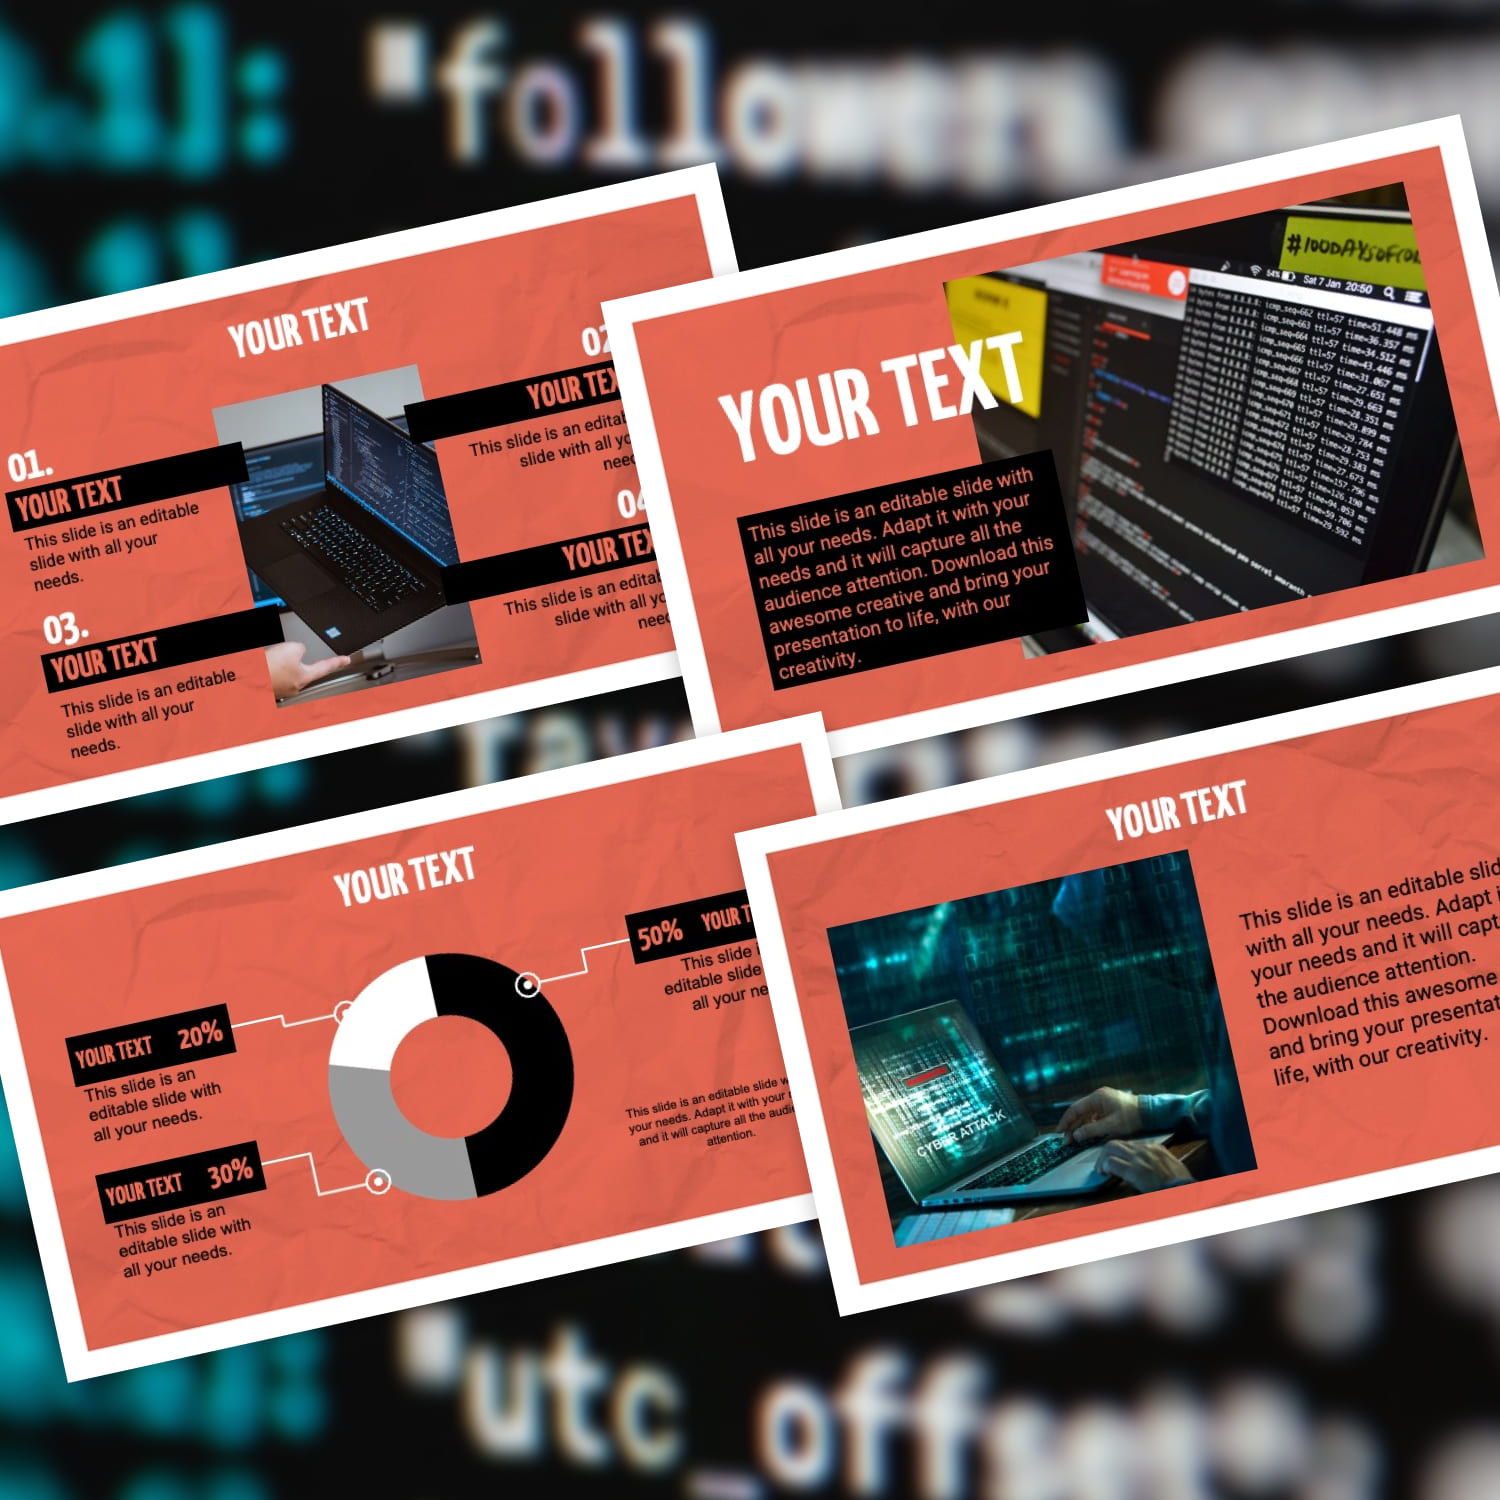 Free cyber security powerpoint template created by MasterbundlesFreebies.